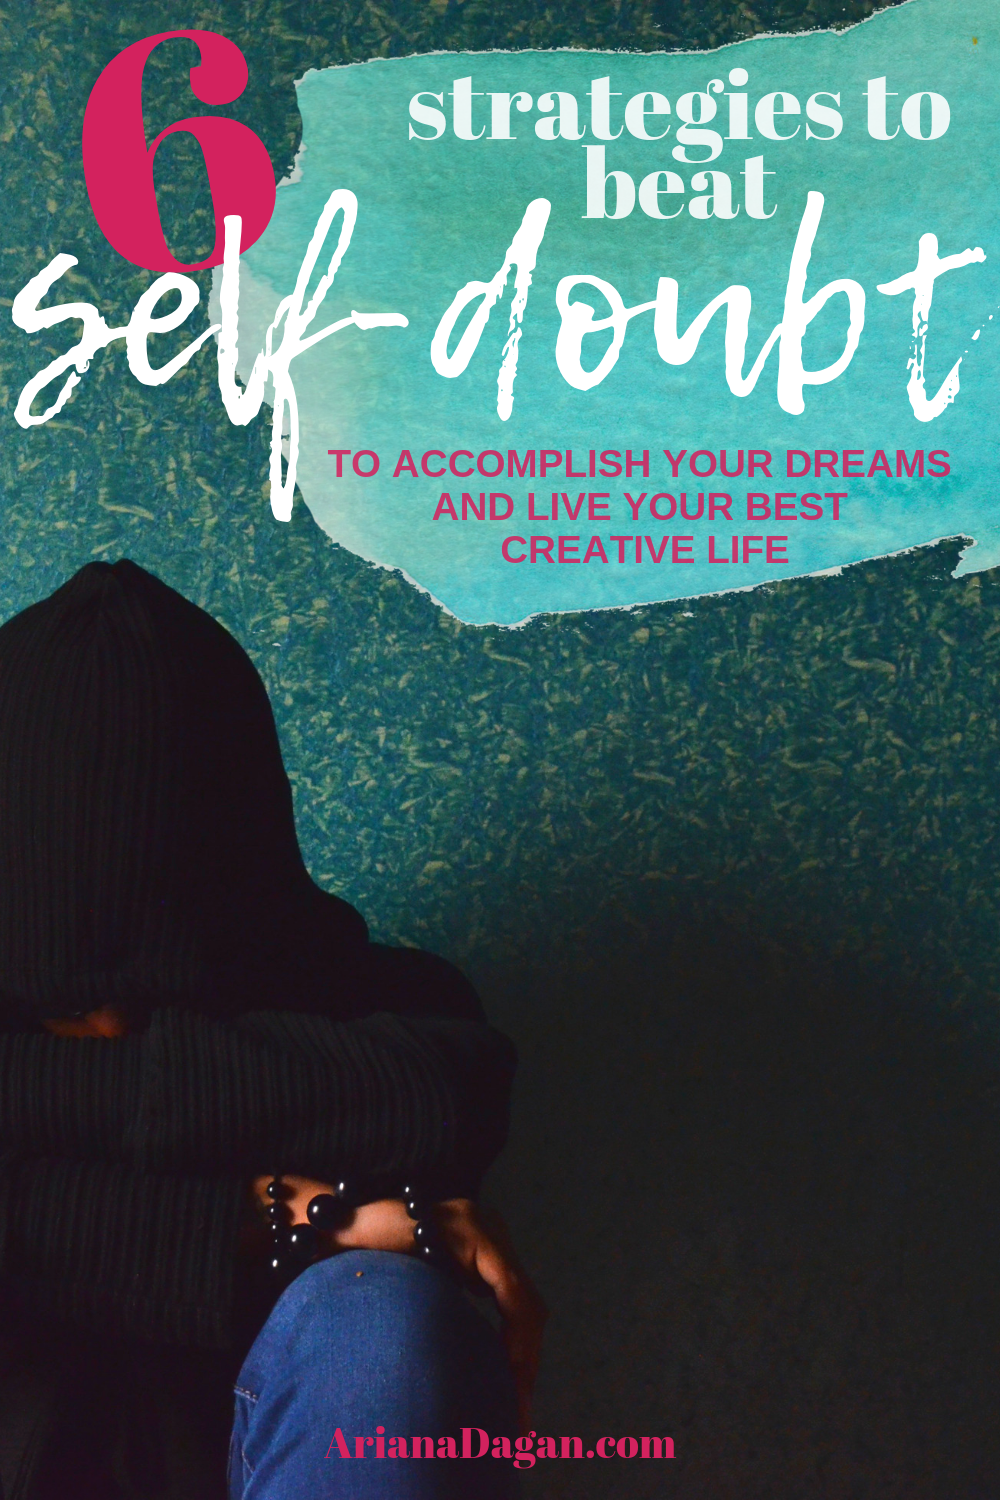 6 strategies to overcome self doubt by Ariana Dagan